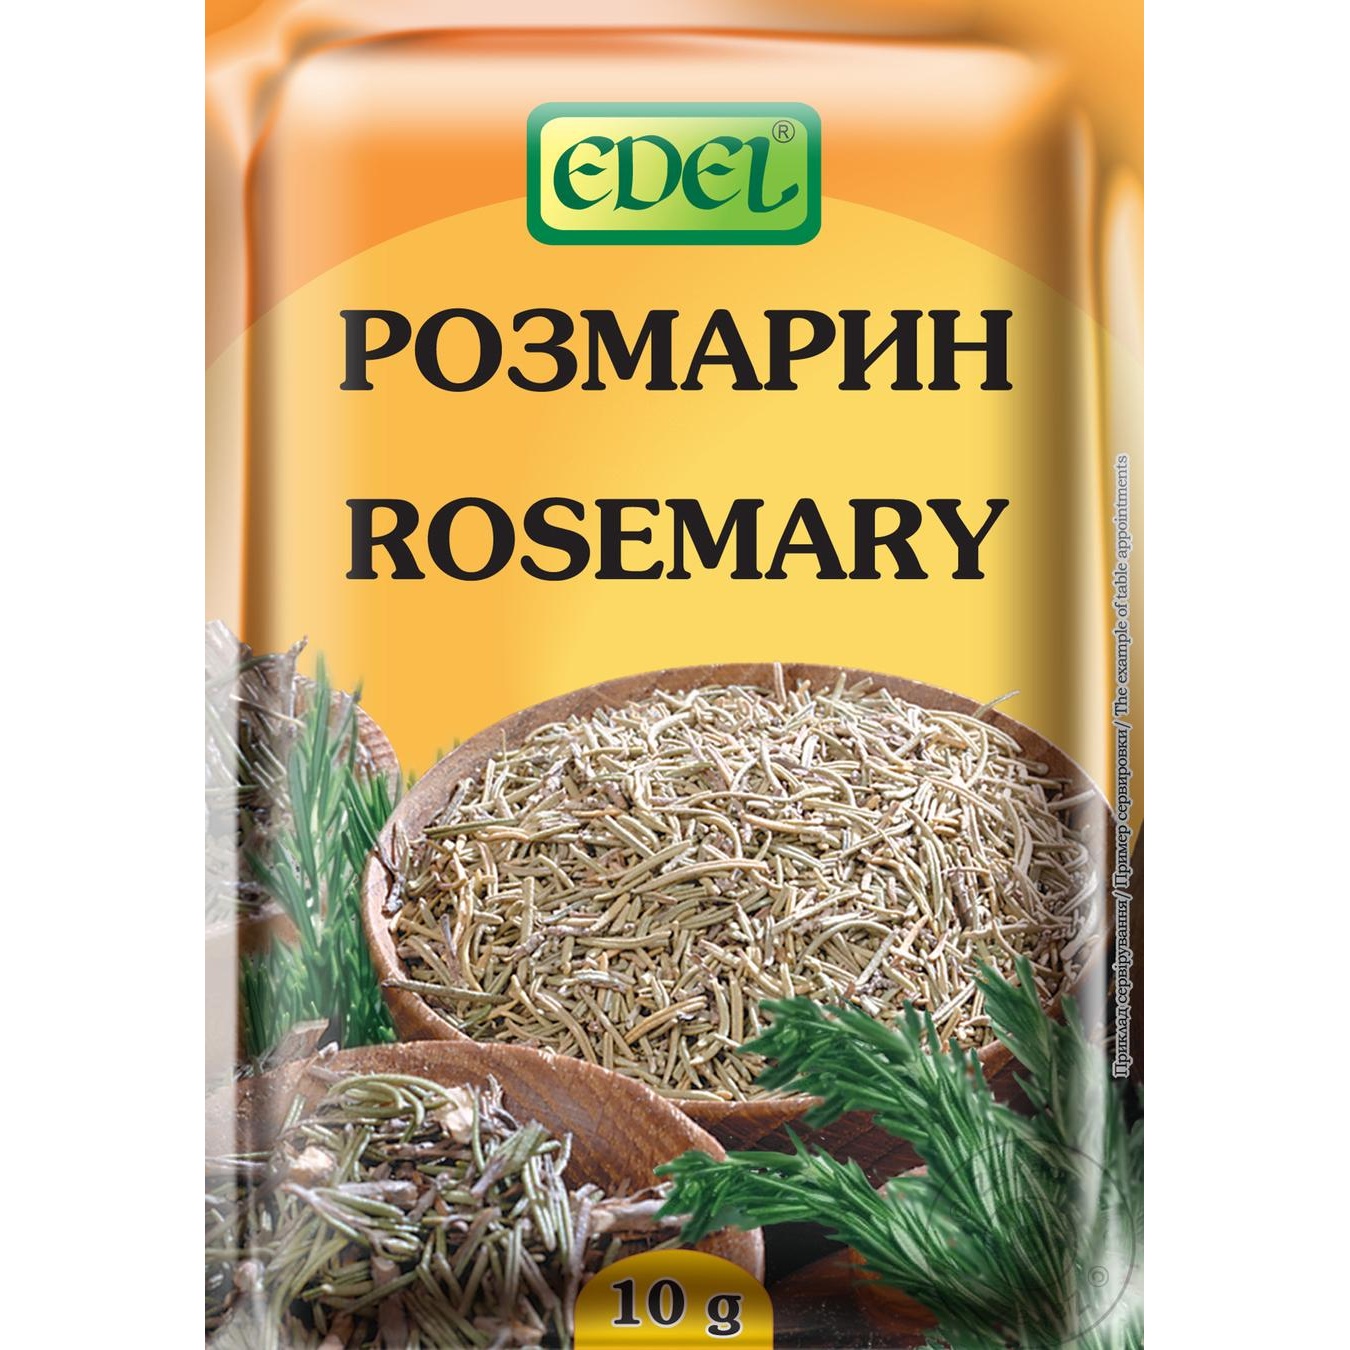 Edel Rosemary Spices 10g